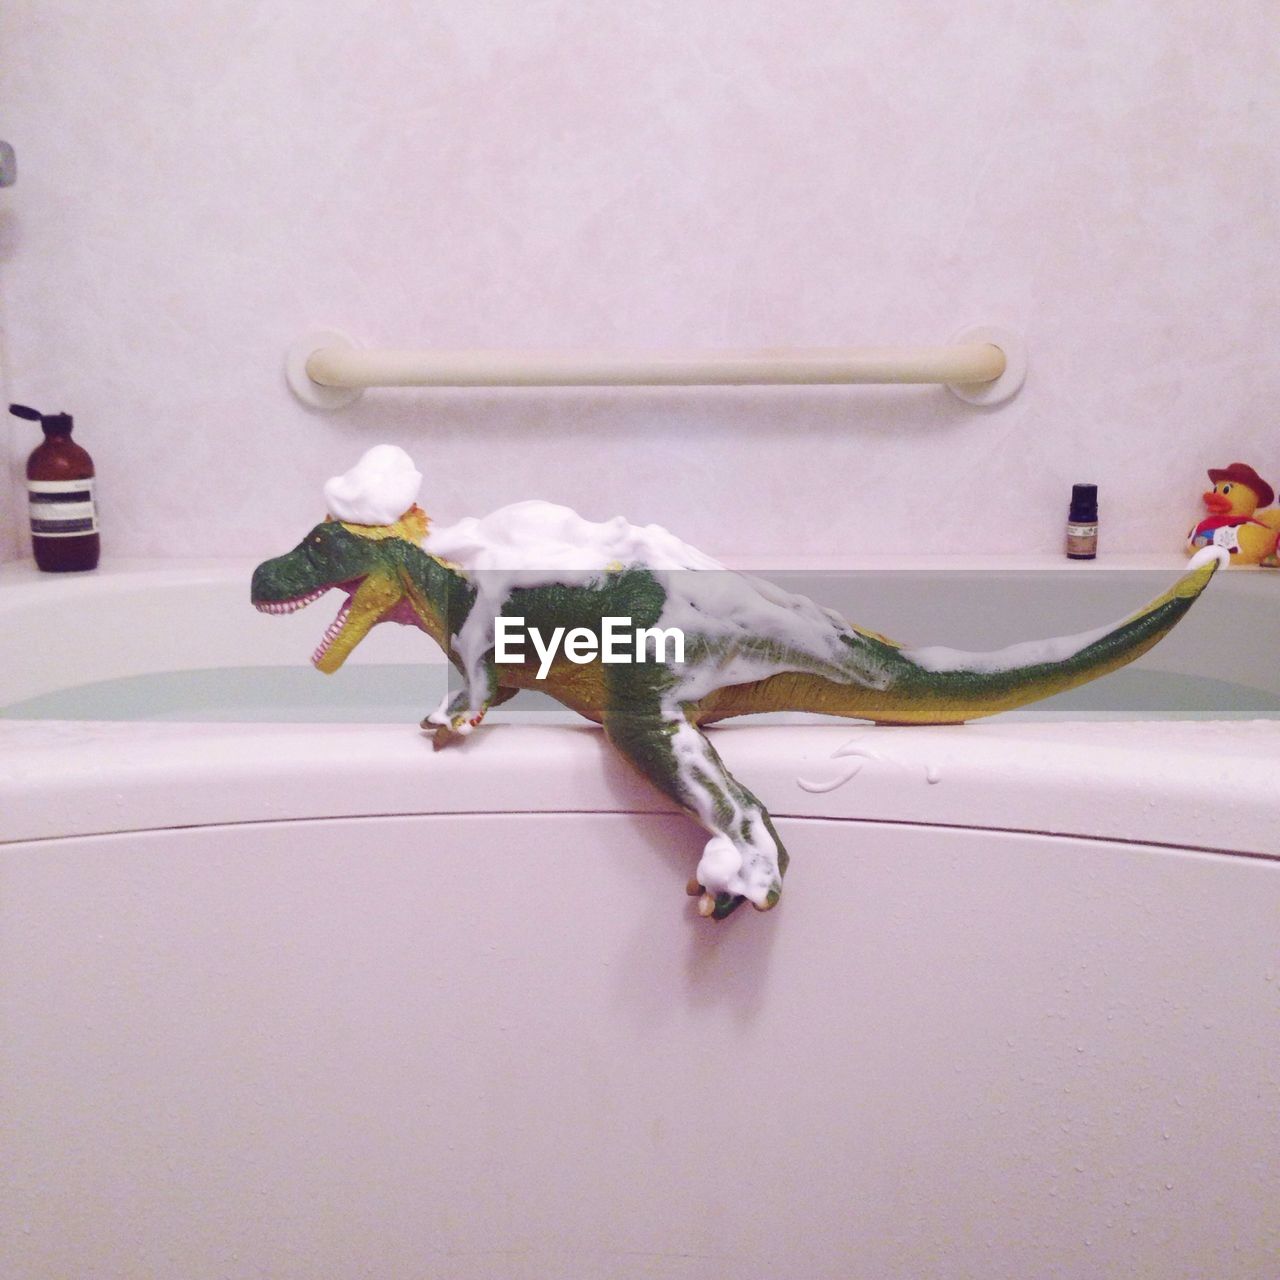 Toy dinosaur covered in foam at bathroom